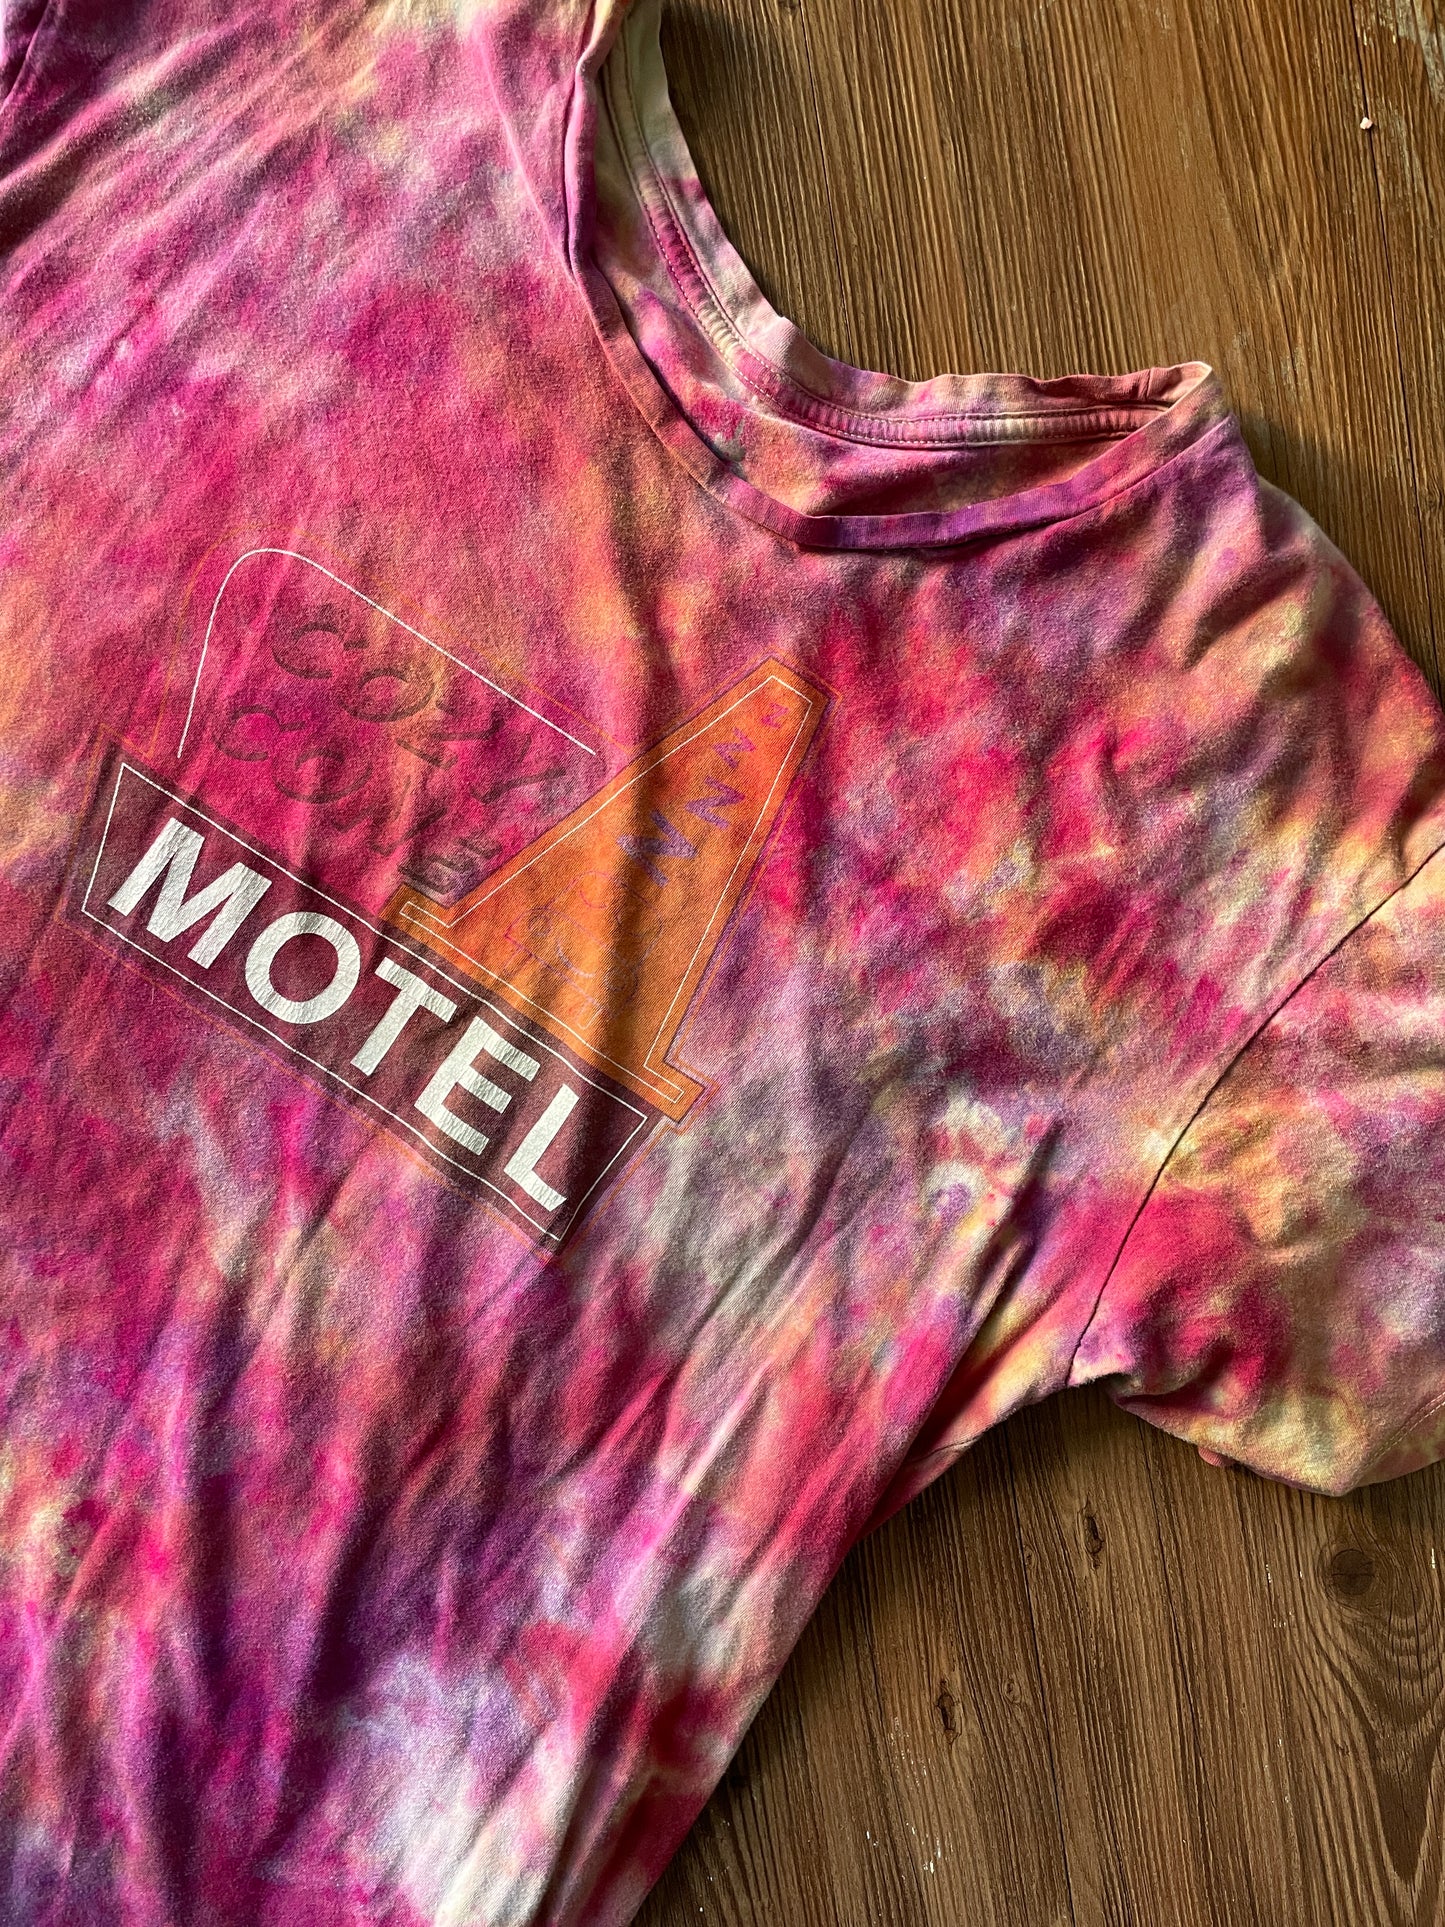 ONE SIZE Men’s Cozy Cone Motel Galaxy Handmade Tie Dye Sleep Shirt | One-Of-a-Kind Pink and Purple Short Sleeve